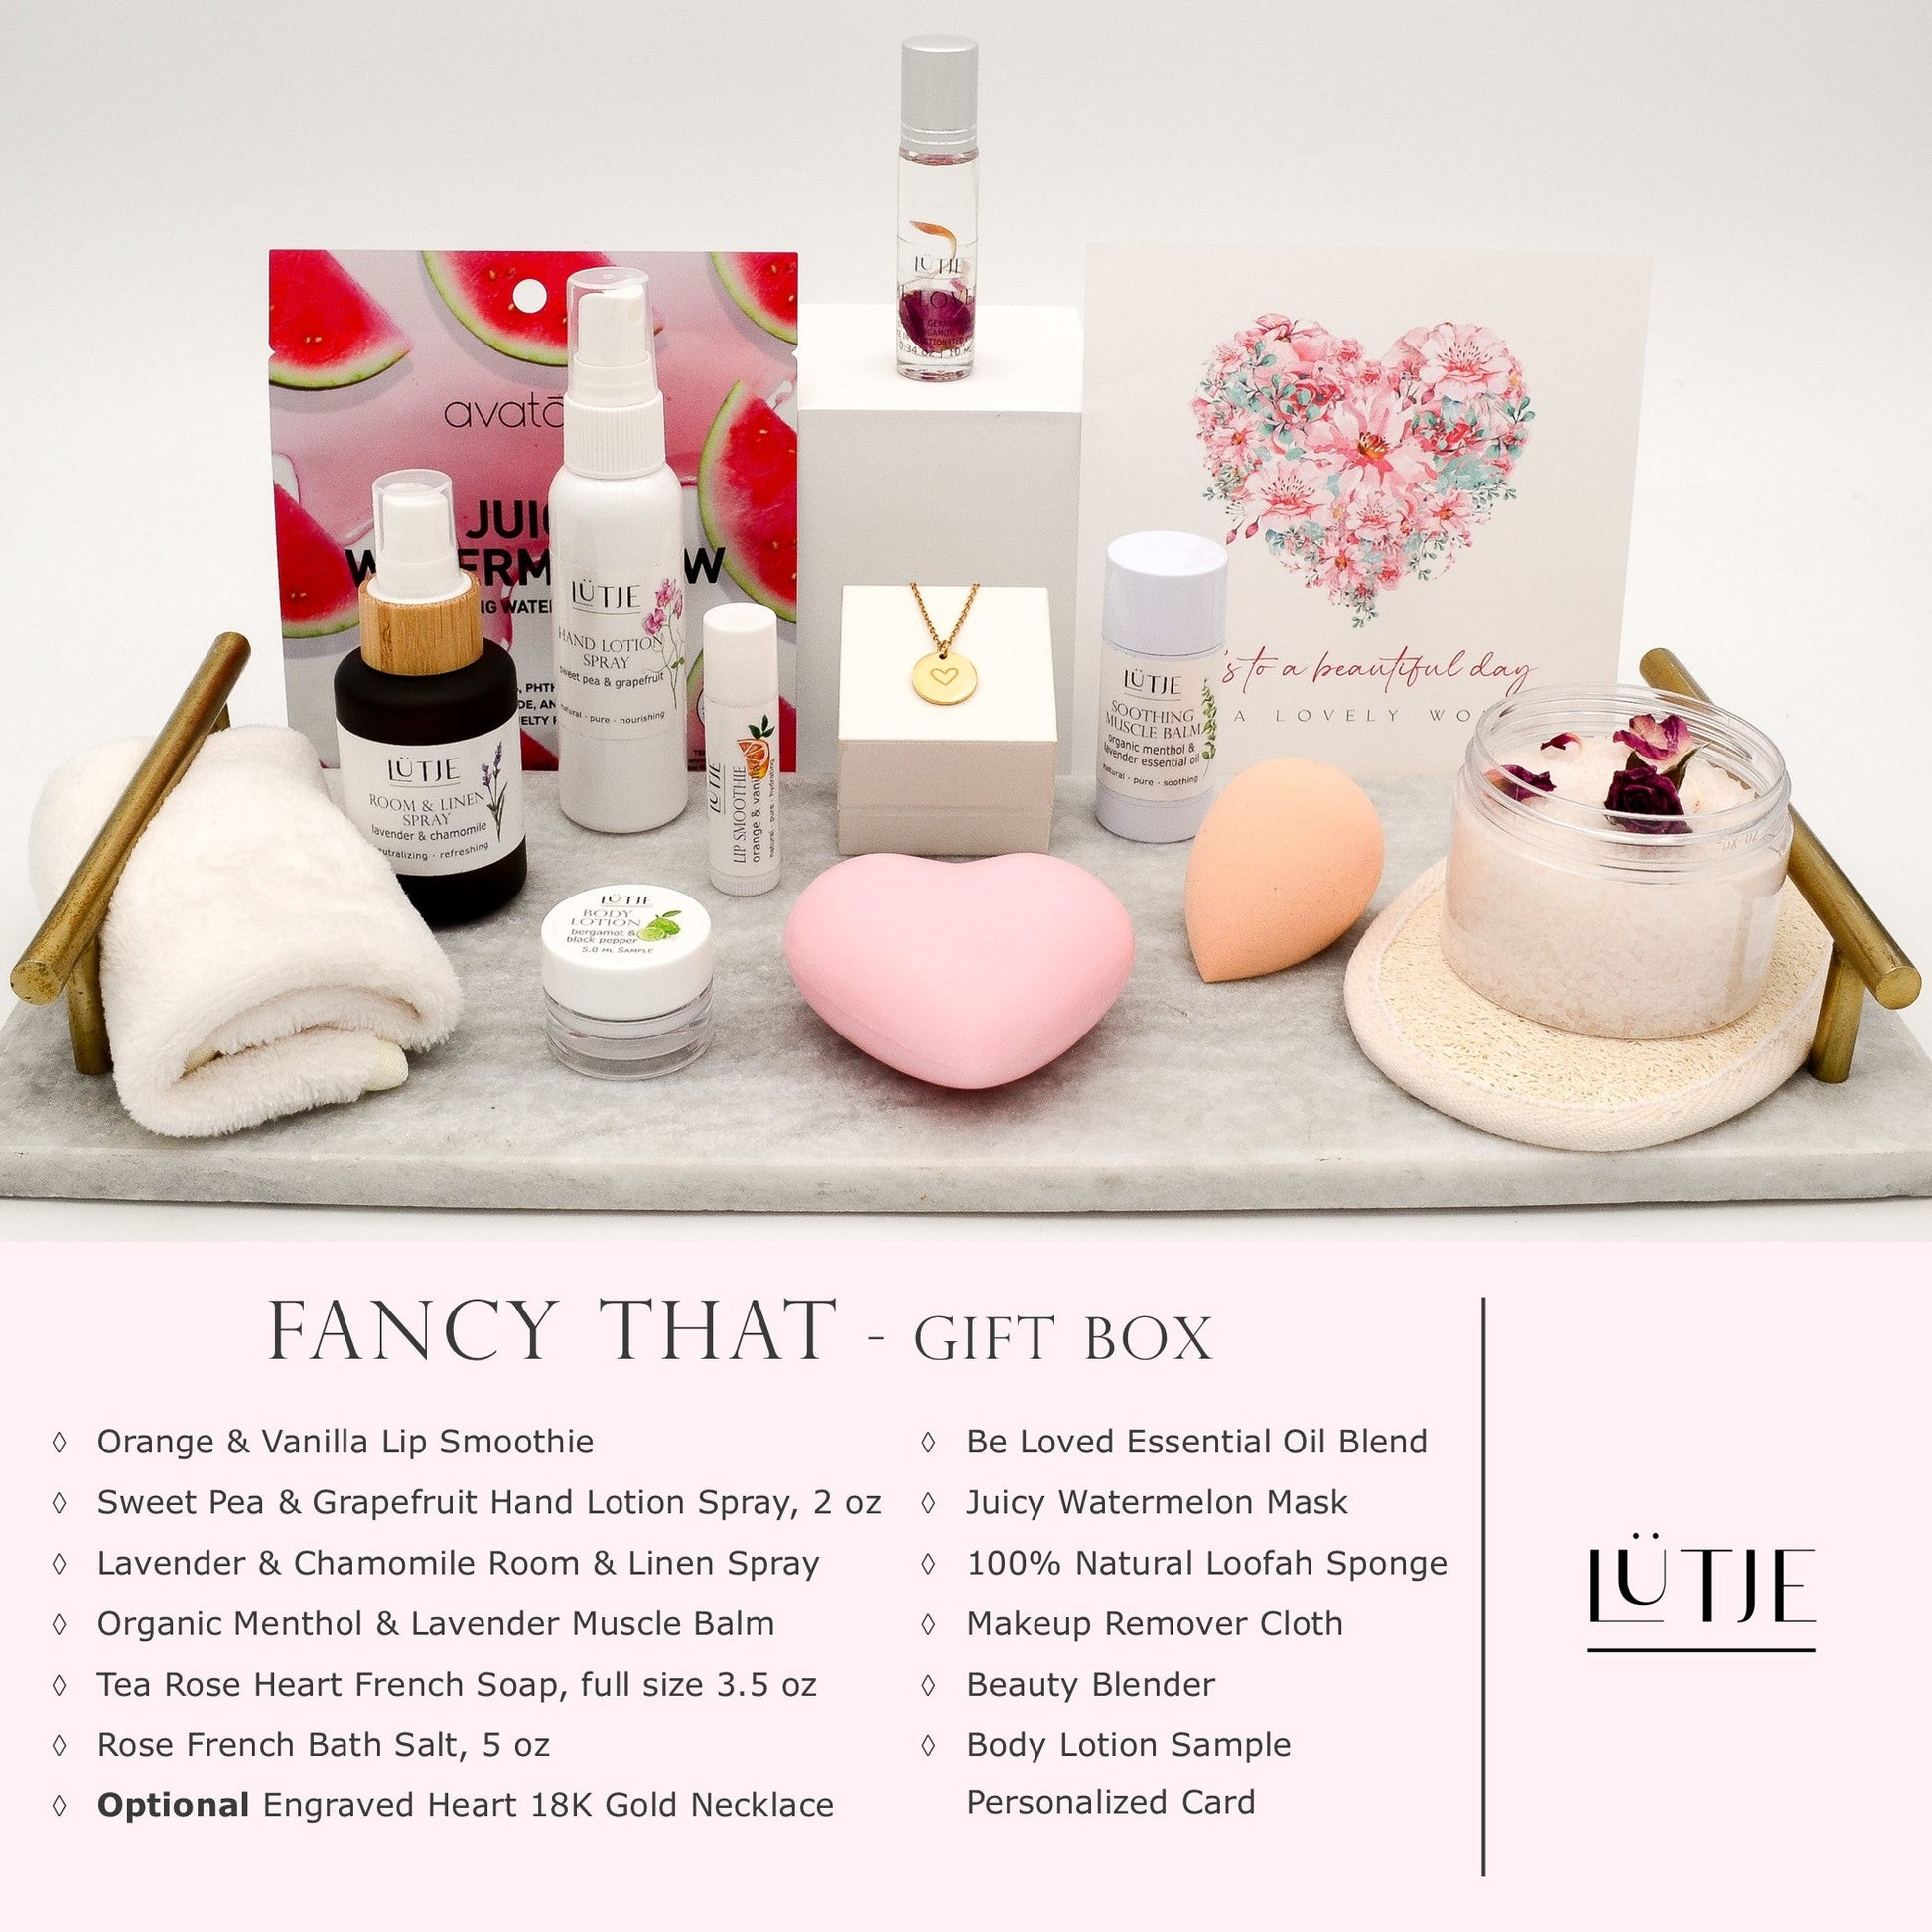 Fancy That Gift Box for women, BFF, wife, daughter, sister, mom, or grandma, includes Sweet Pea & Grapefruit hand lotion spray, essential oil, lip balm, soothing muscle balm, Lavender & Chamomile room & linen spray, French soap, French bath salts, hydrating face mask, other bath, spa and self-care items, and 18K gold-plated necklace with engraved heart.